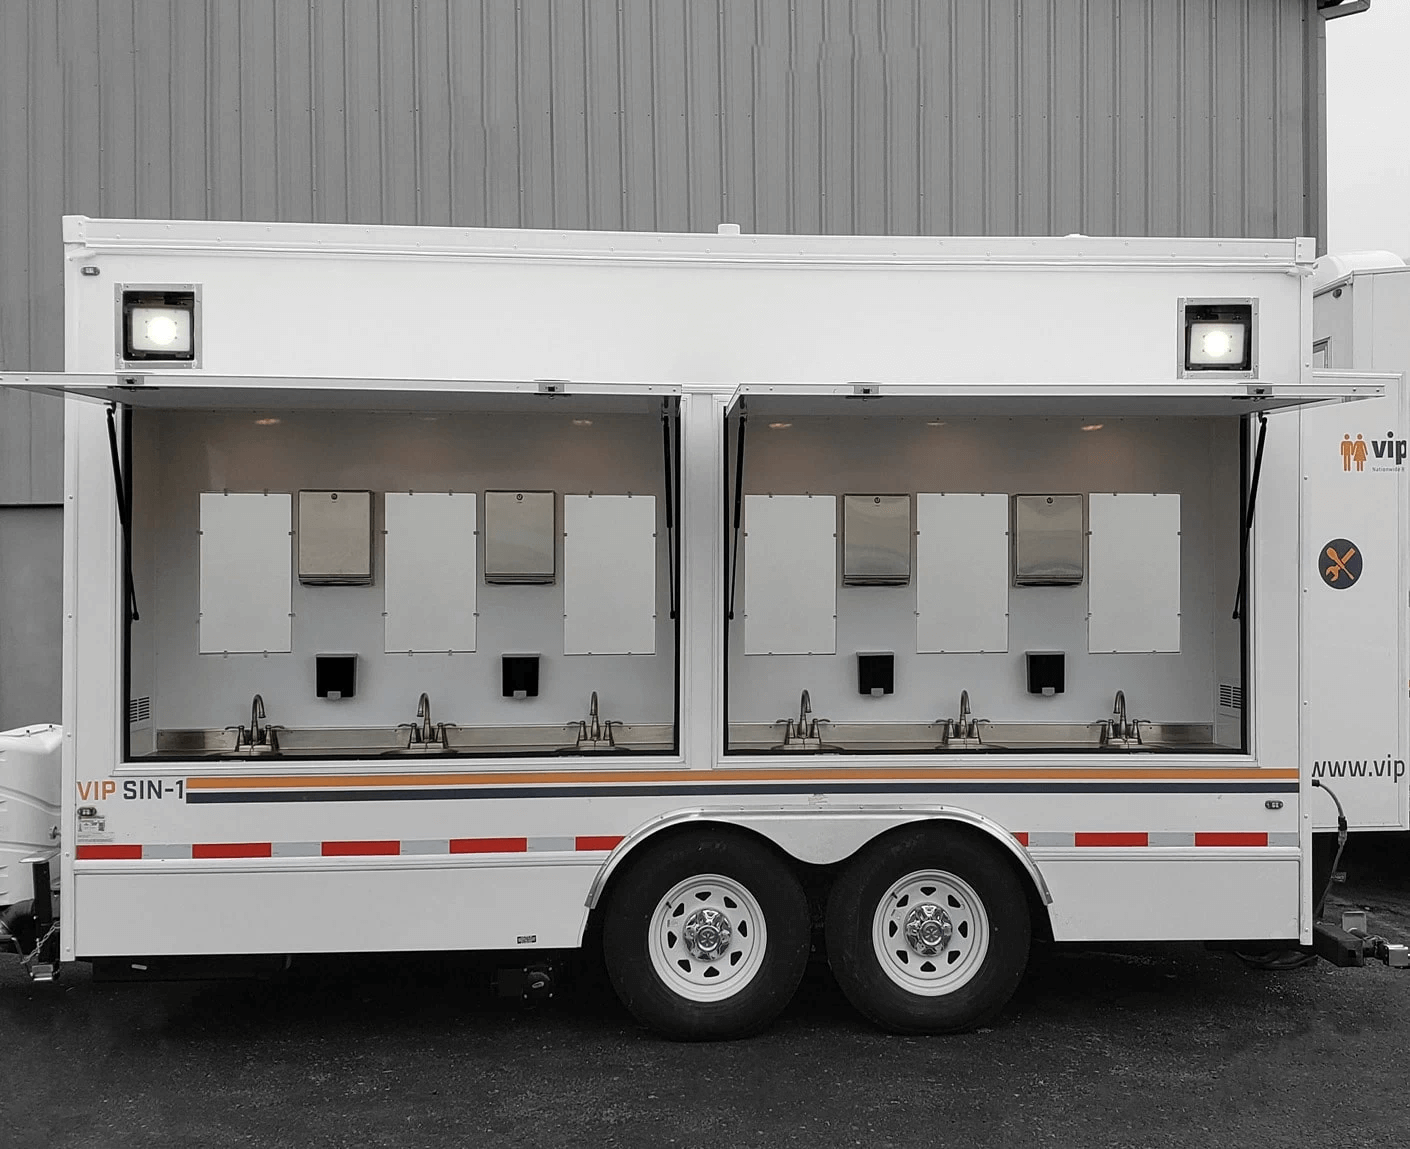 Portable sink trailer with multiple handwashing stations